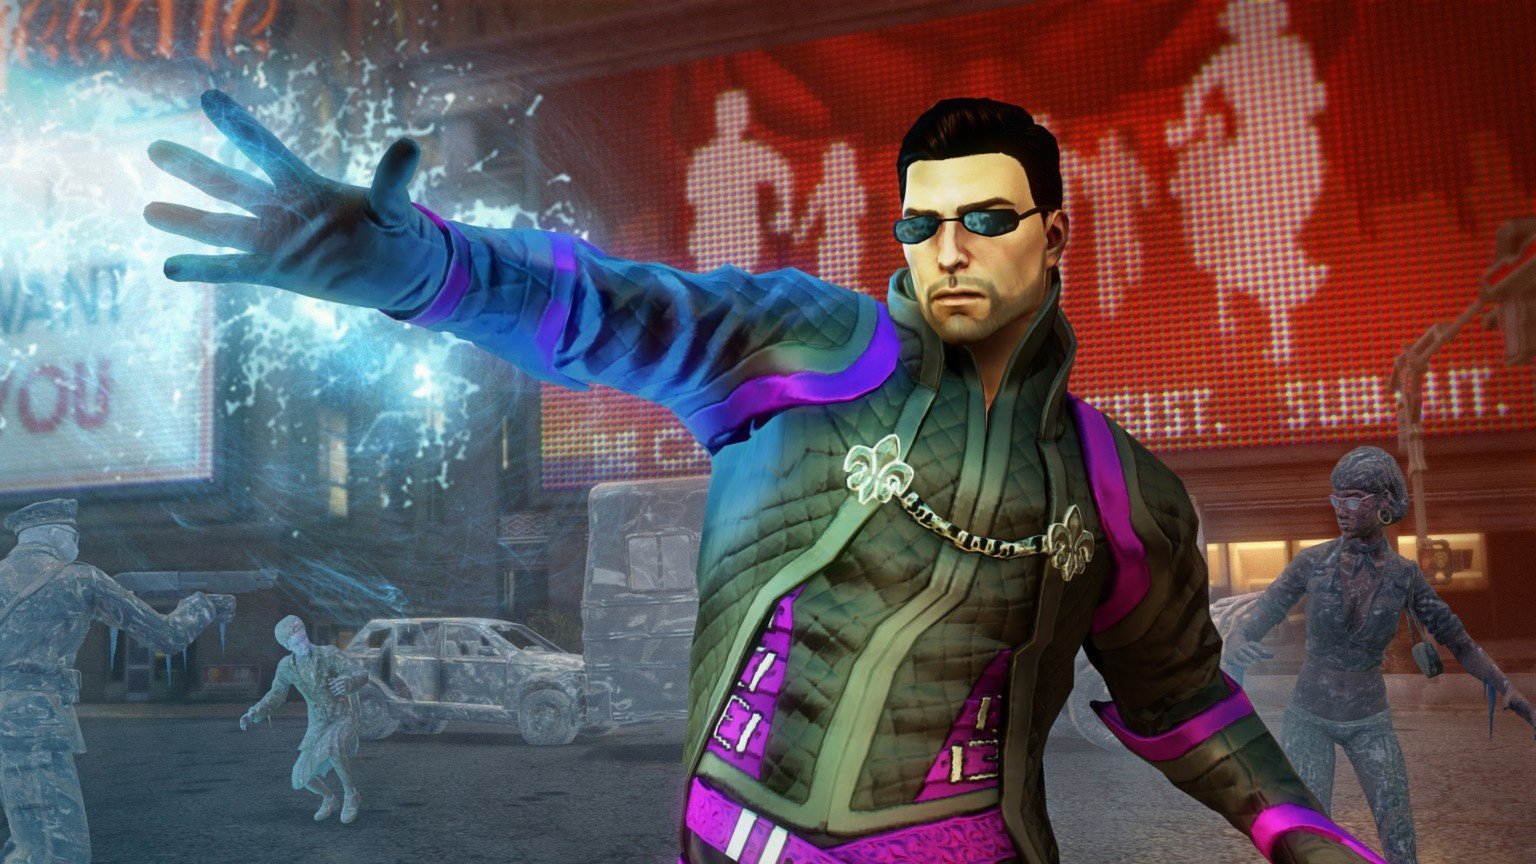 will saints row 4 come to switch